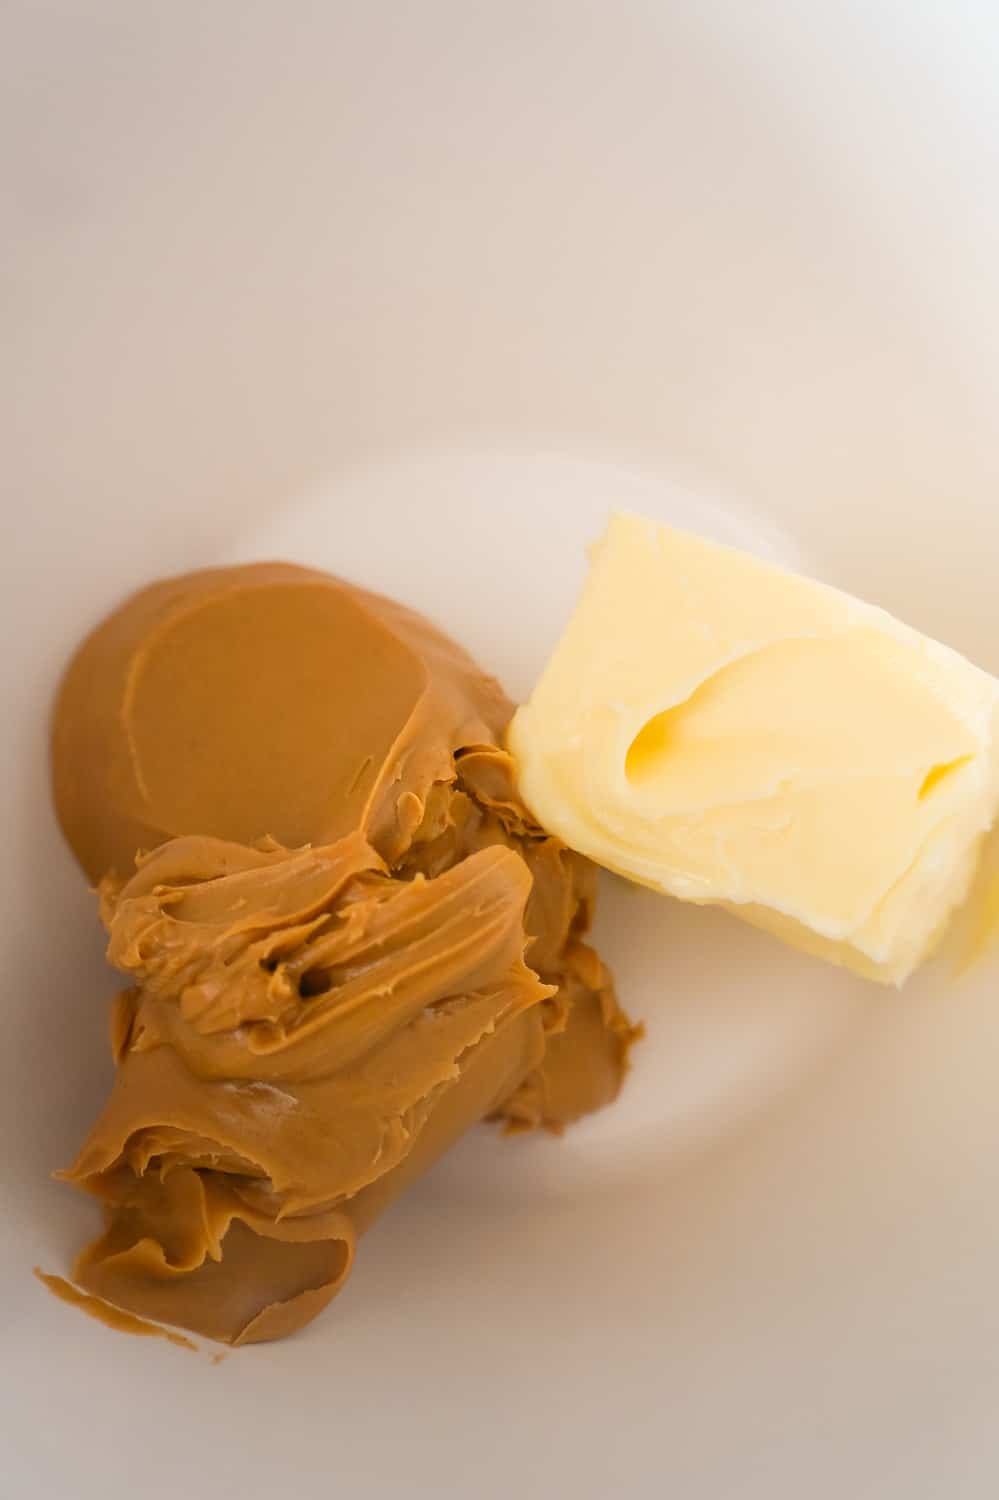 peanut butter and butter in a mixing bowl